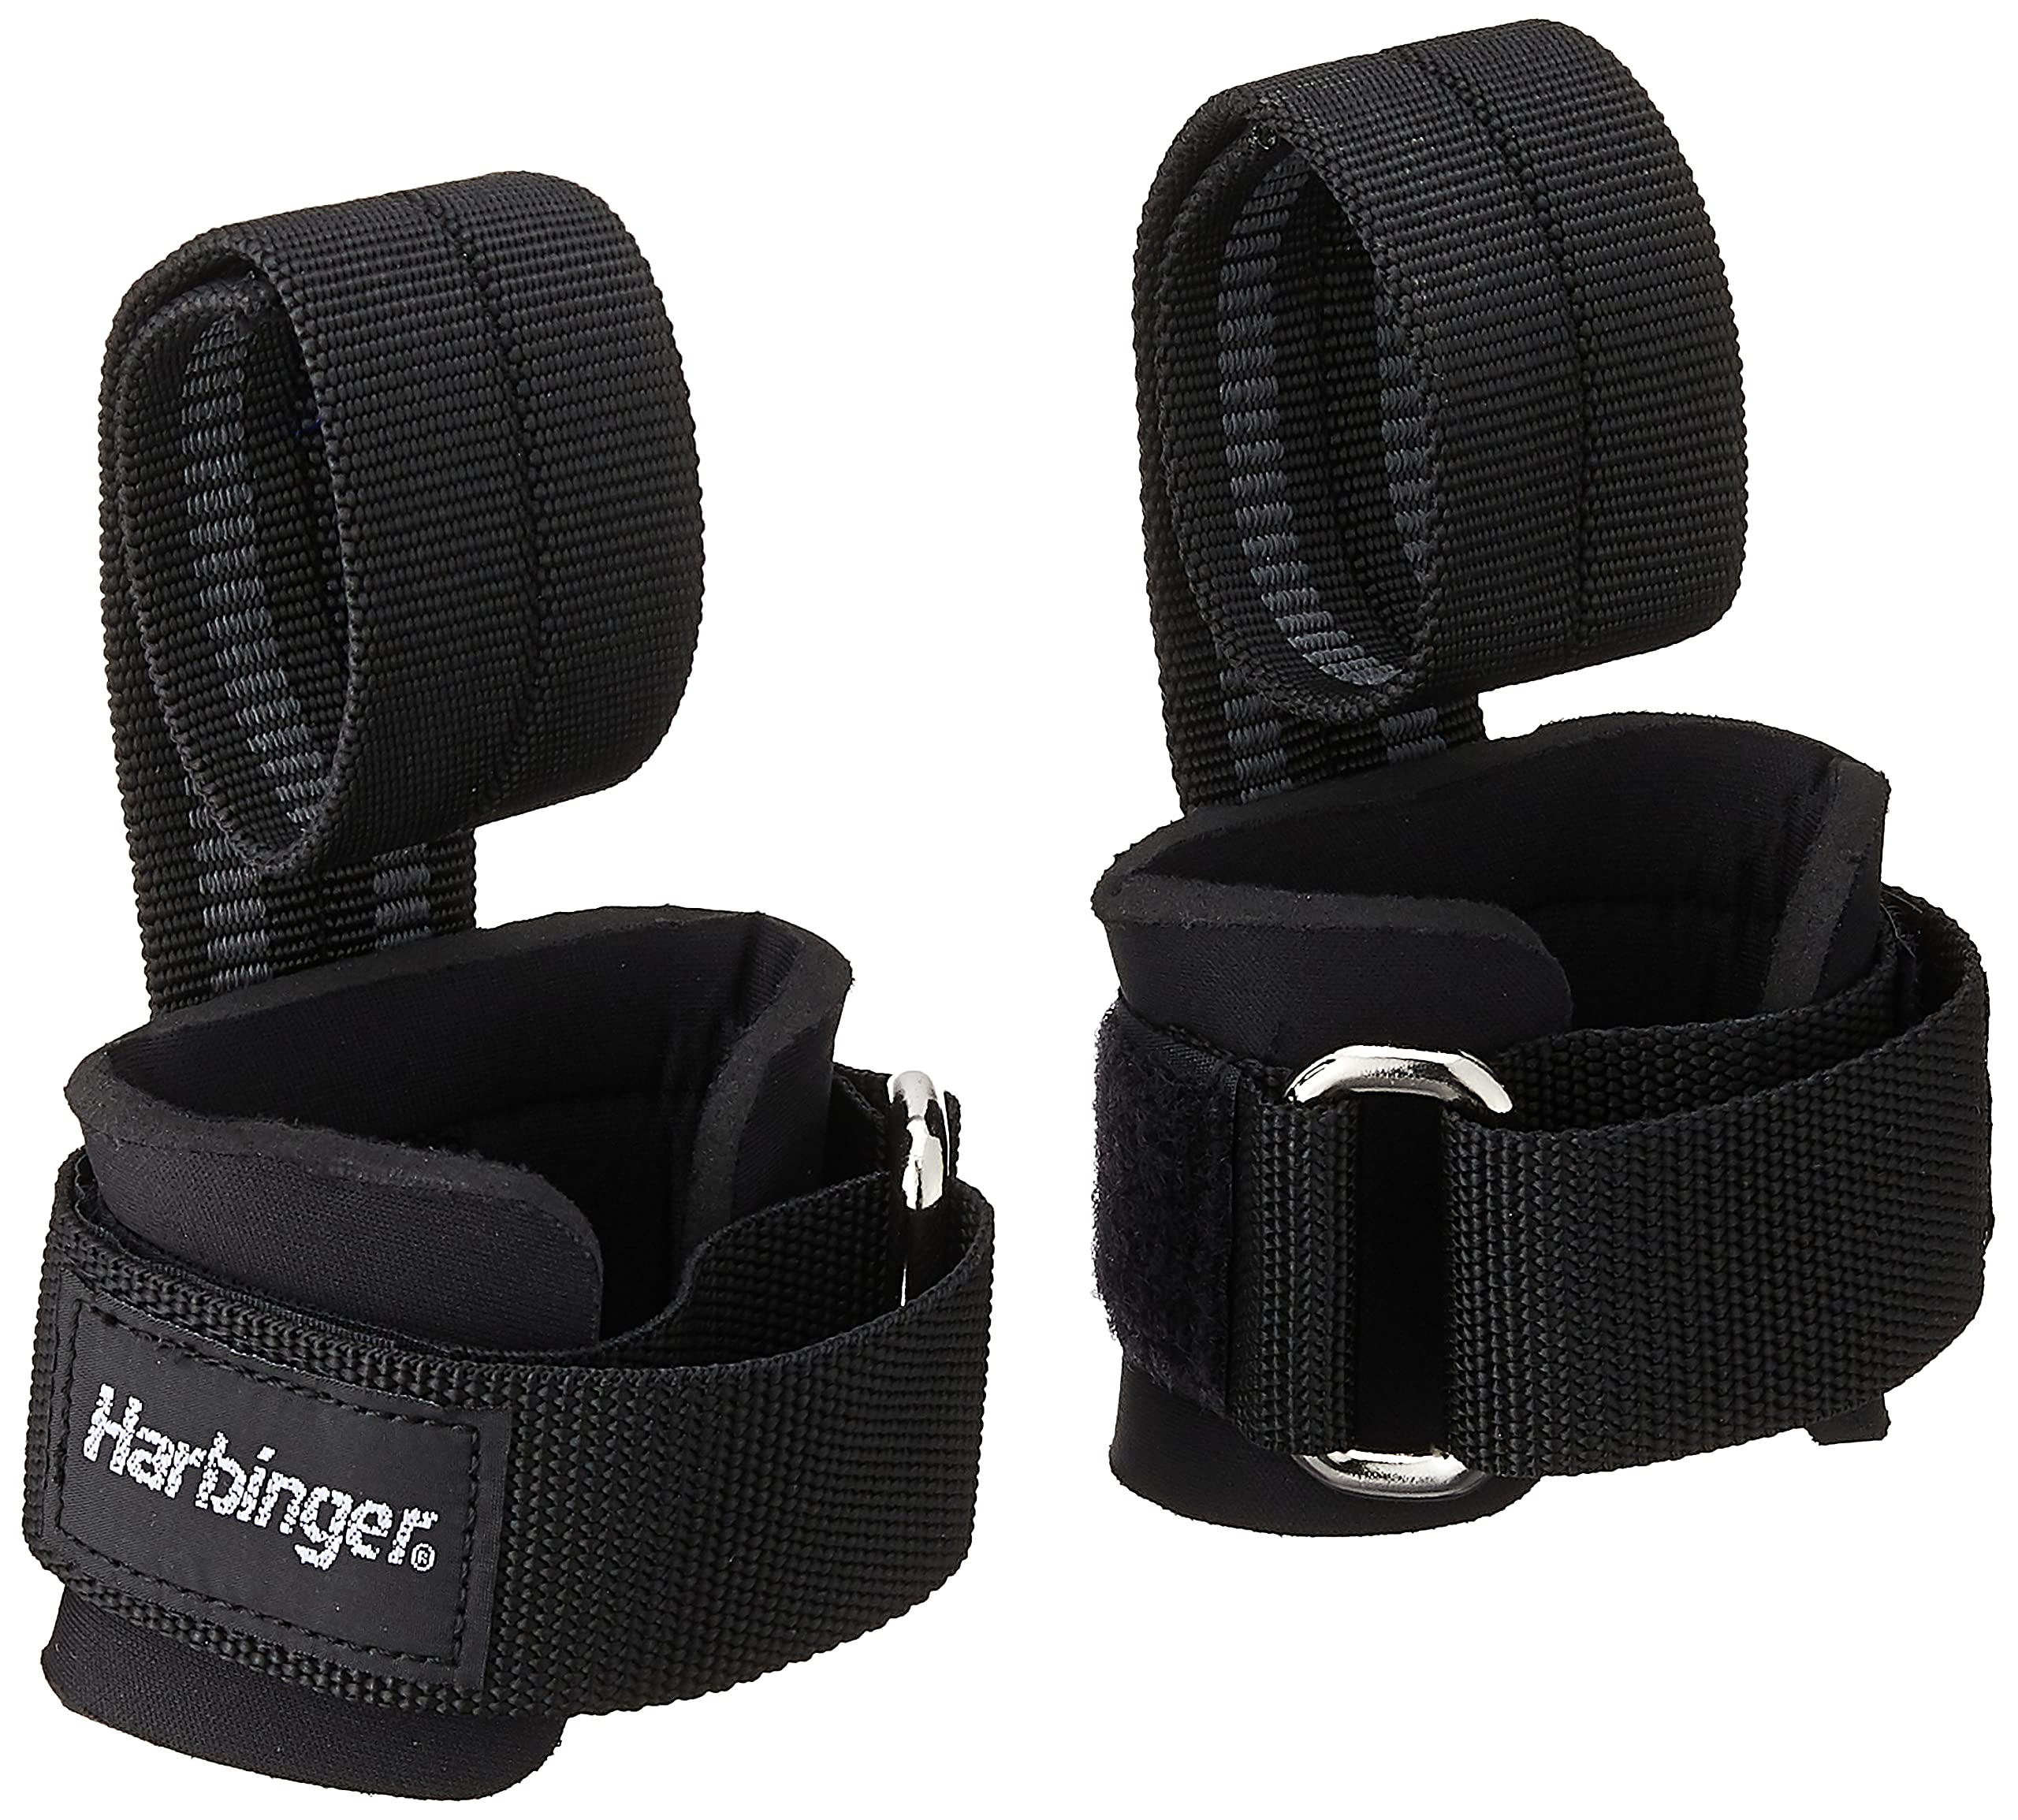 Harbinger"Big Grip" Non-Slip Lifting Strap With Buckle